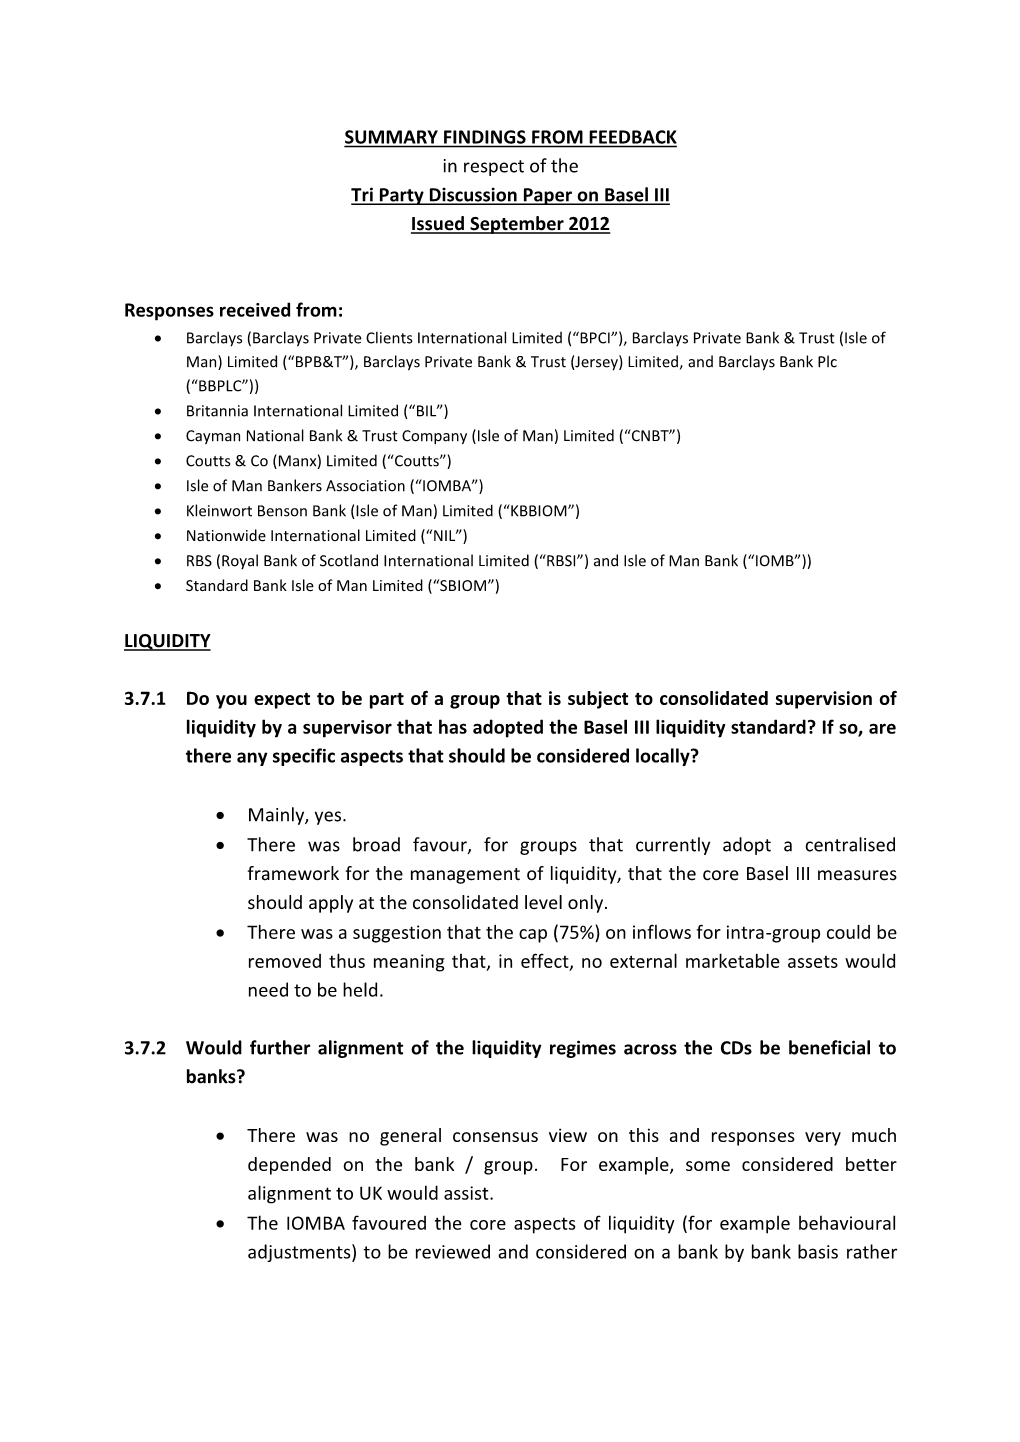 SUMMARY FINDINGS from FEEDBACK in Respect of the Tri Party Discussion Paper on Basel III Issued September 2012